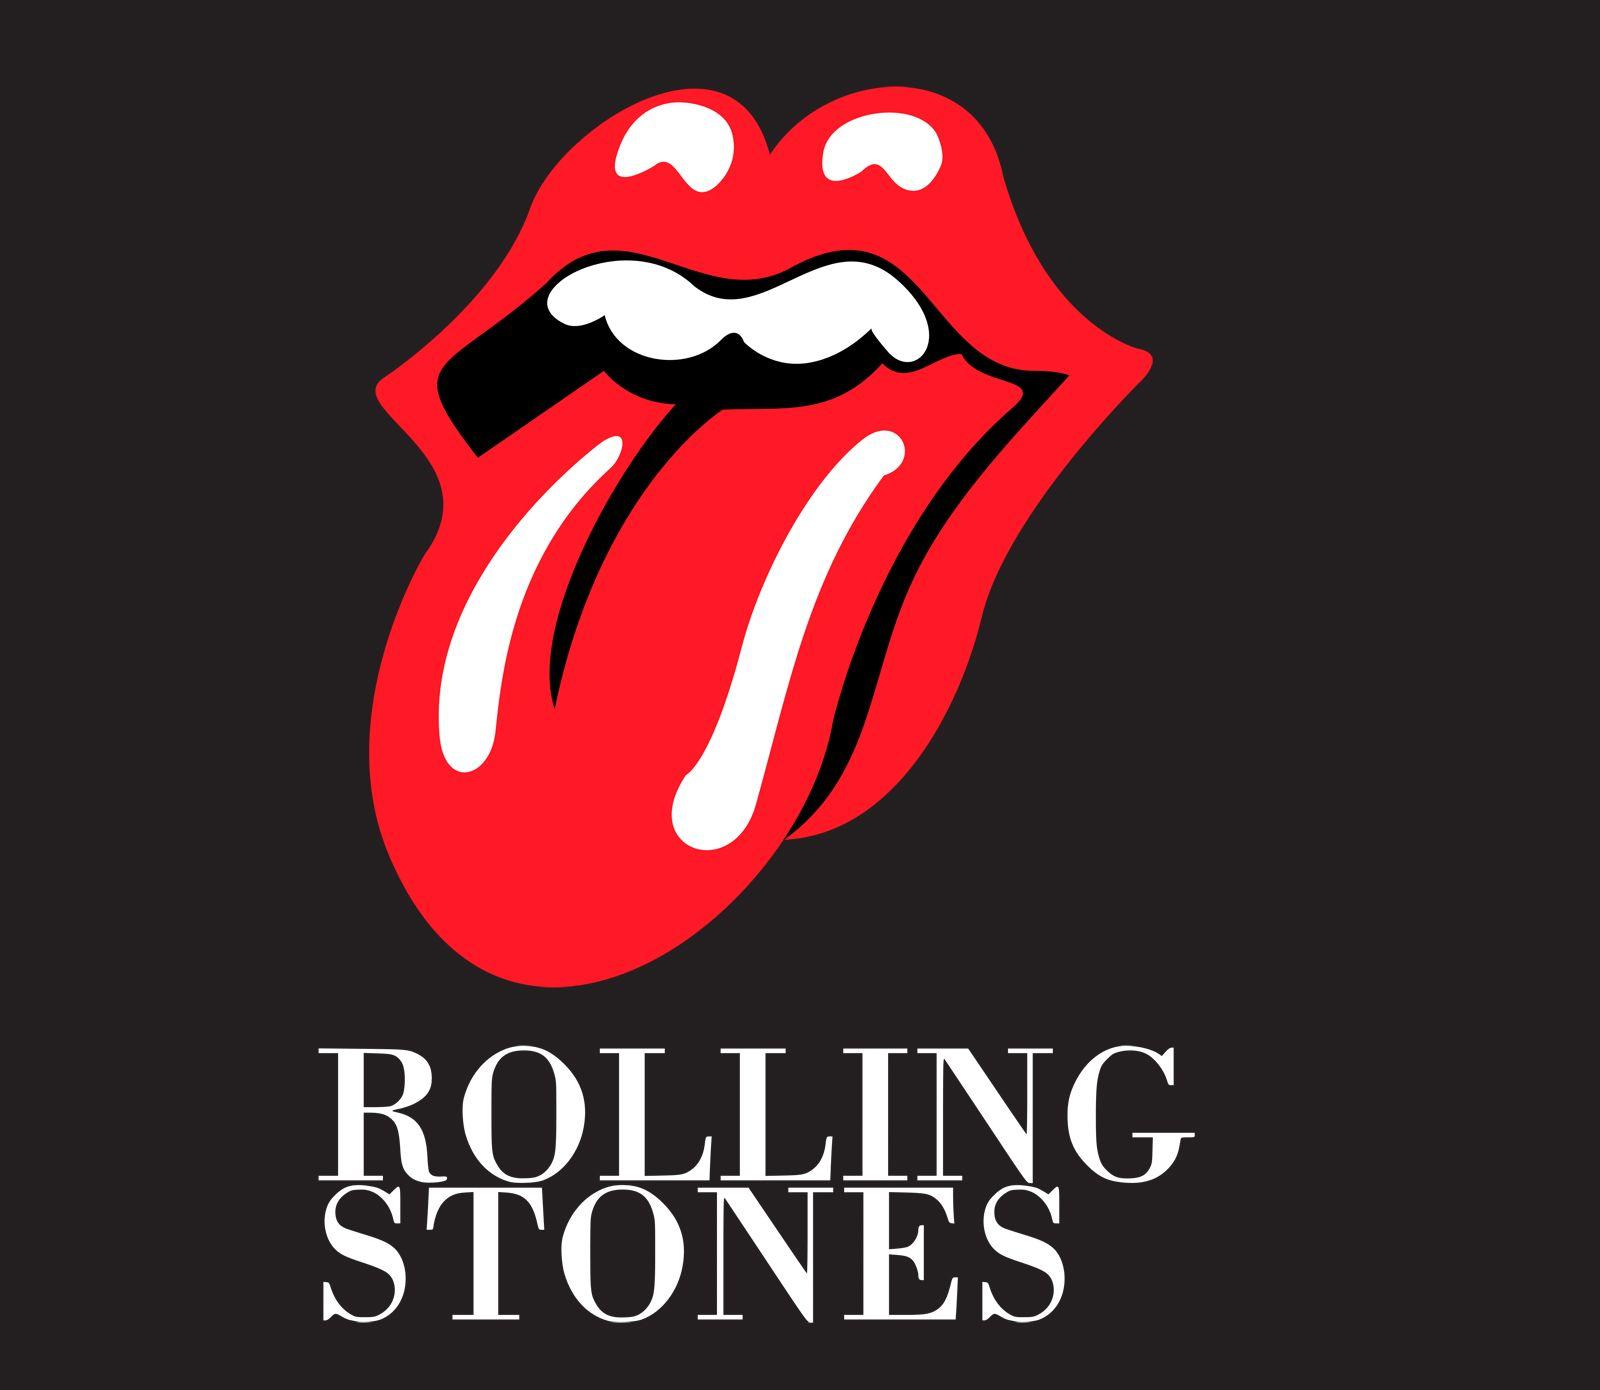 New Rolling Stone Logo - Rolling Stones Logo, Rolling Stones Symbol, Meaning, History and ...